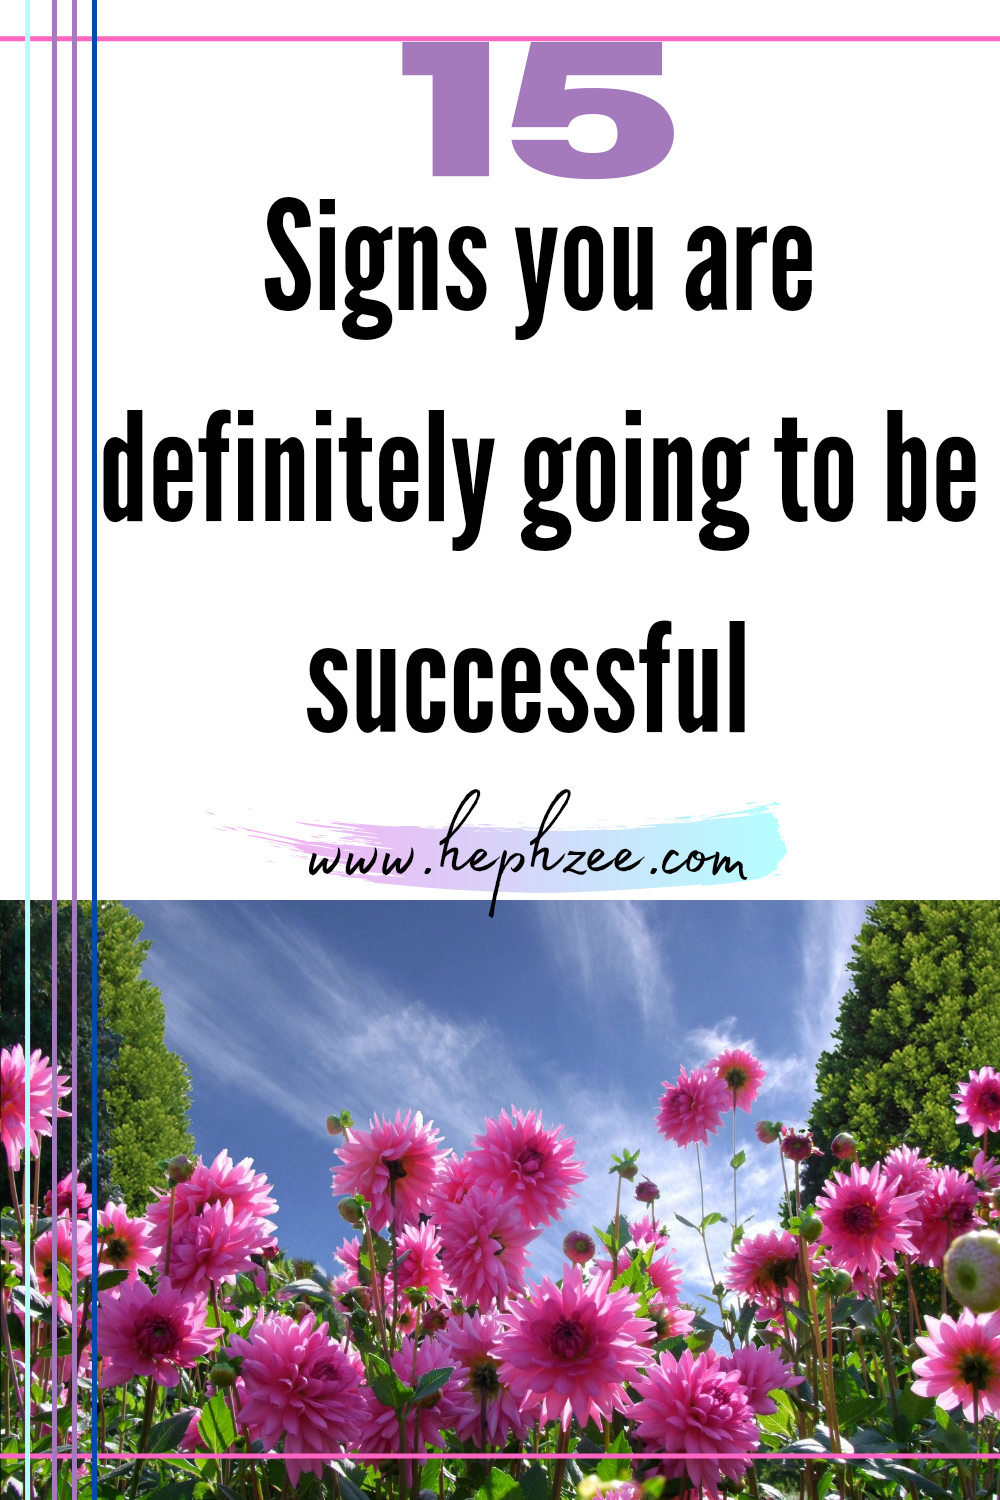 Signs you are going to be successful